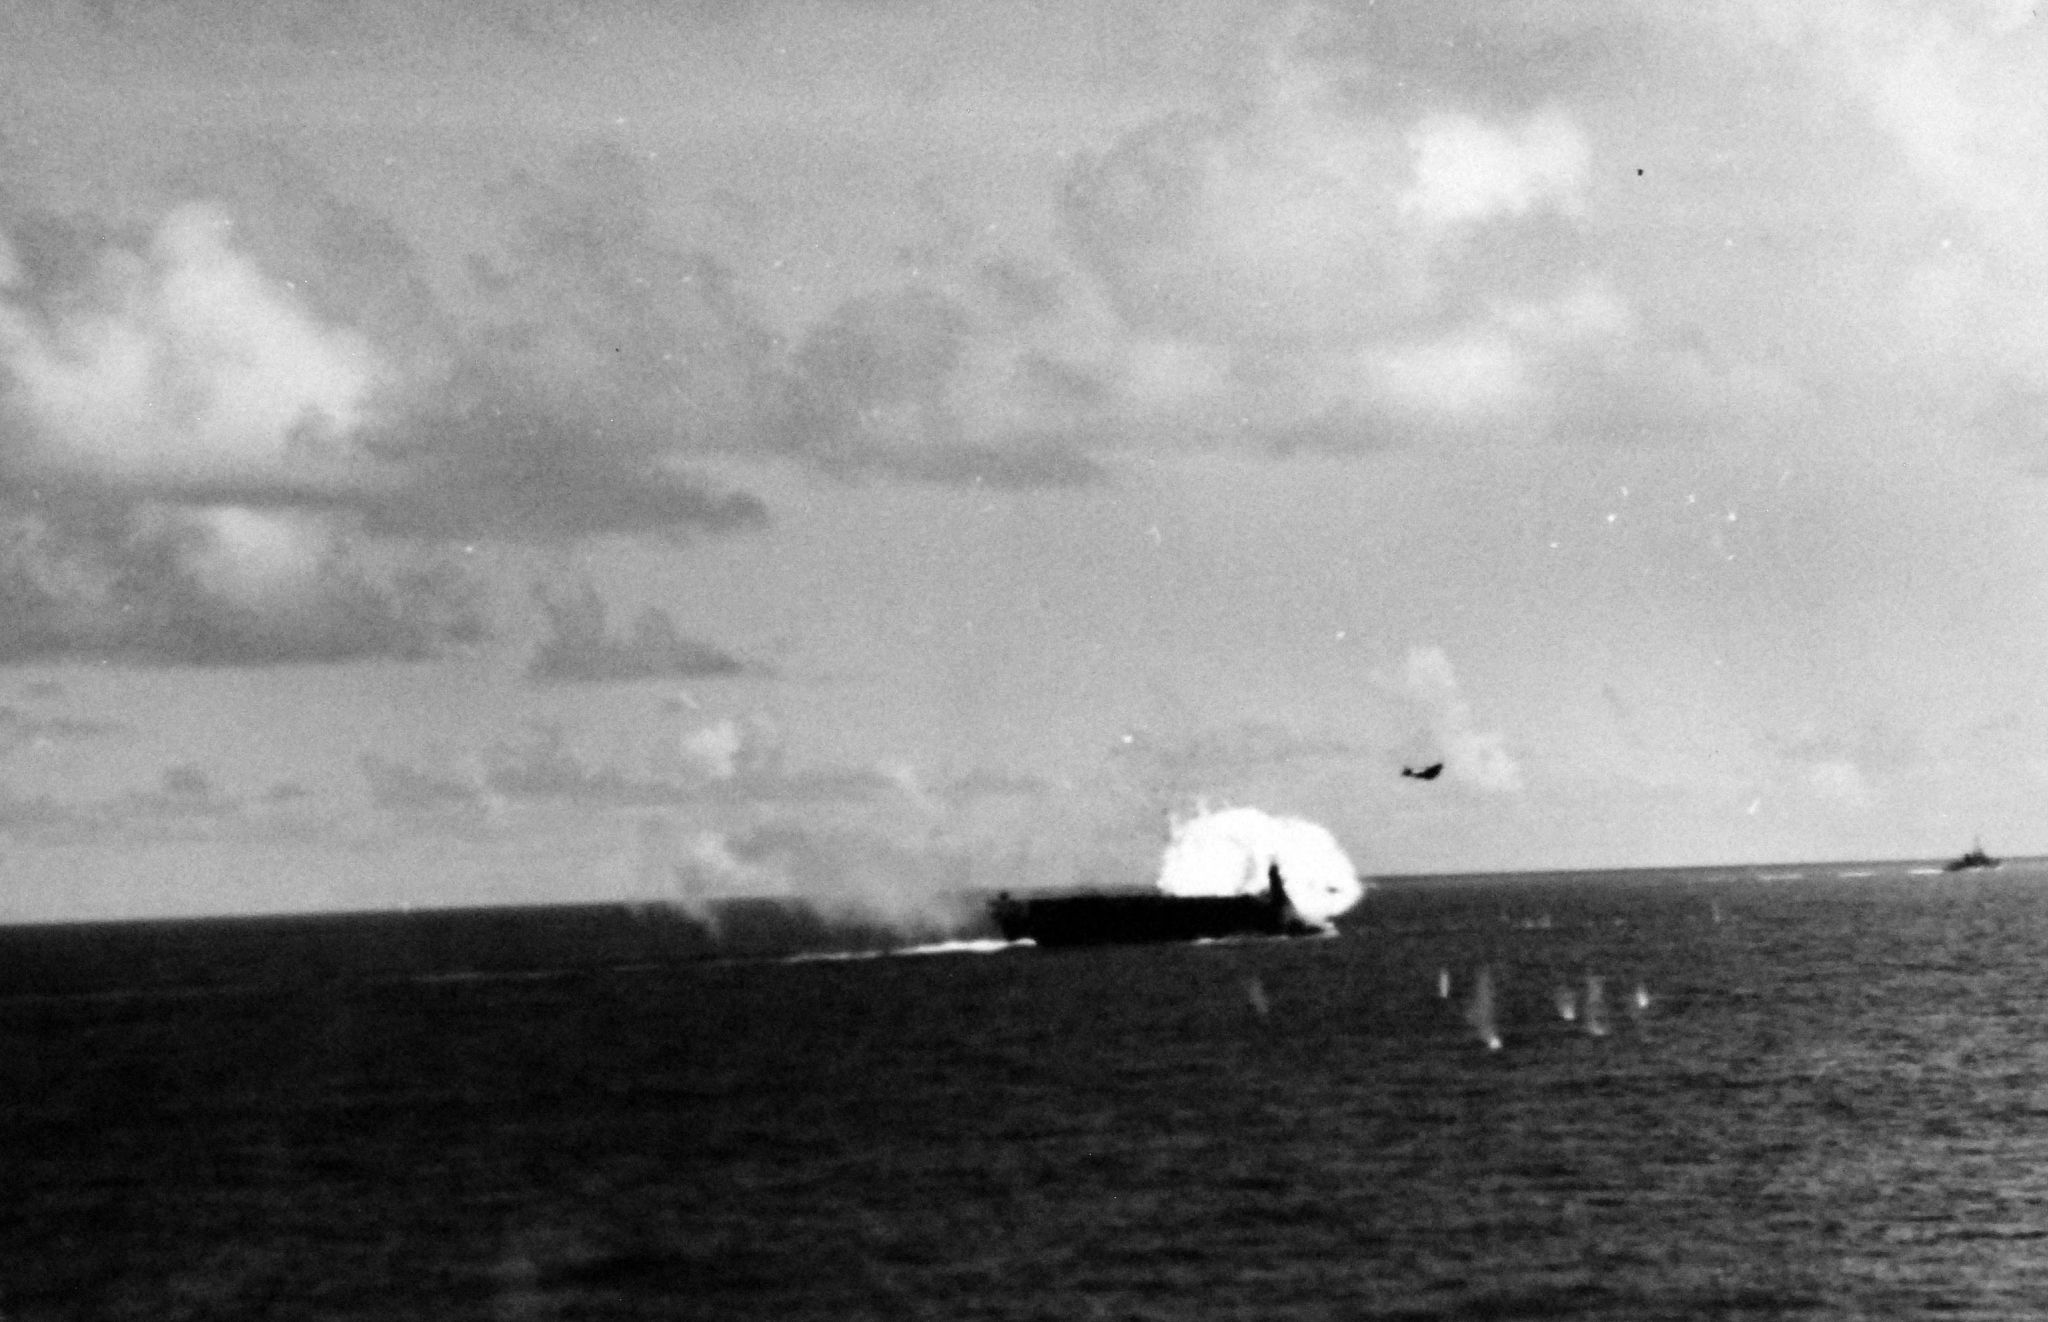 A Zeke crashes into the flight deck of USS Suwanee (CVE-27), 26 October 1944. (National Archives and Records Administration 80-G-270613)